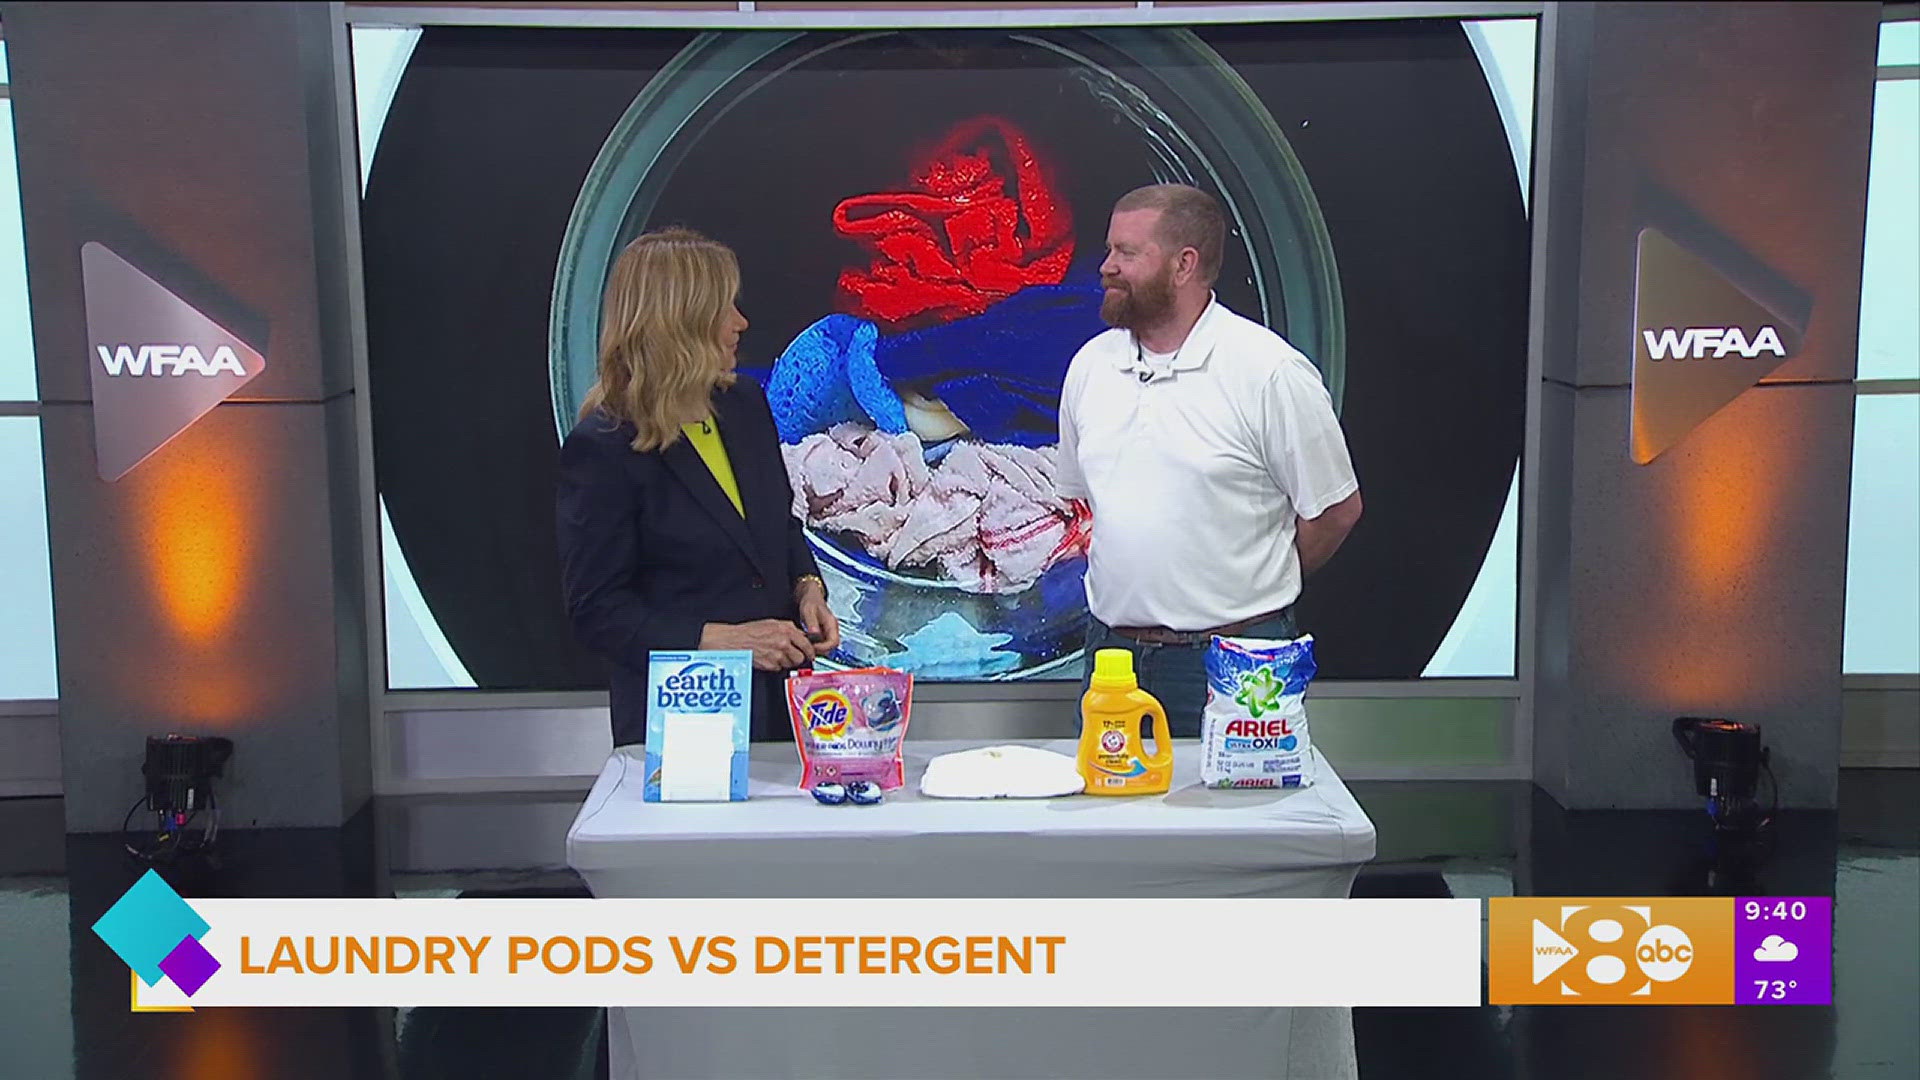 Laundry On Demand CEO James Chandler shares the pros and cons of laundry detergent options. Go to laundryod.com for more information.